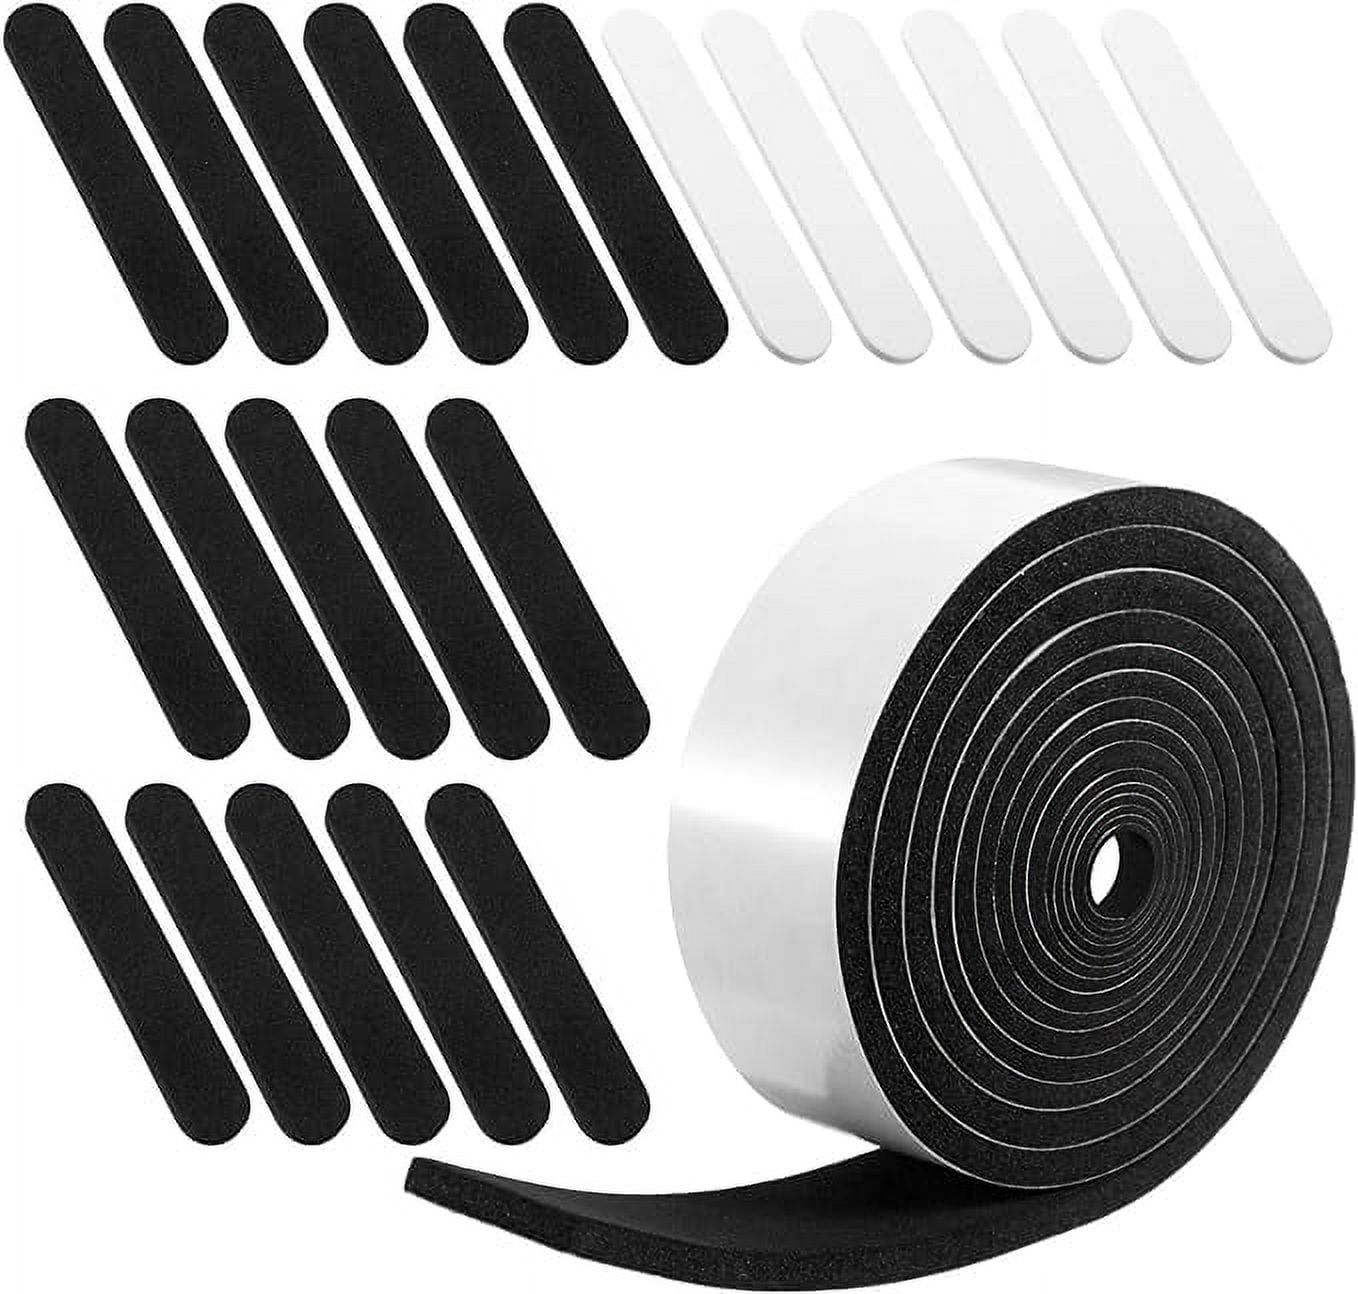 Prasacco 24 Pcs Hat Size Reducer, Hat Sizing Tape Foam Hat Sizer Insert  Tape Hat Adjuster Band for Hat Sweat Liner Protector (Black White)